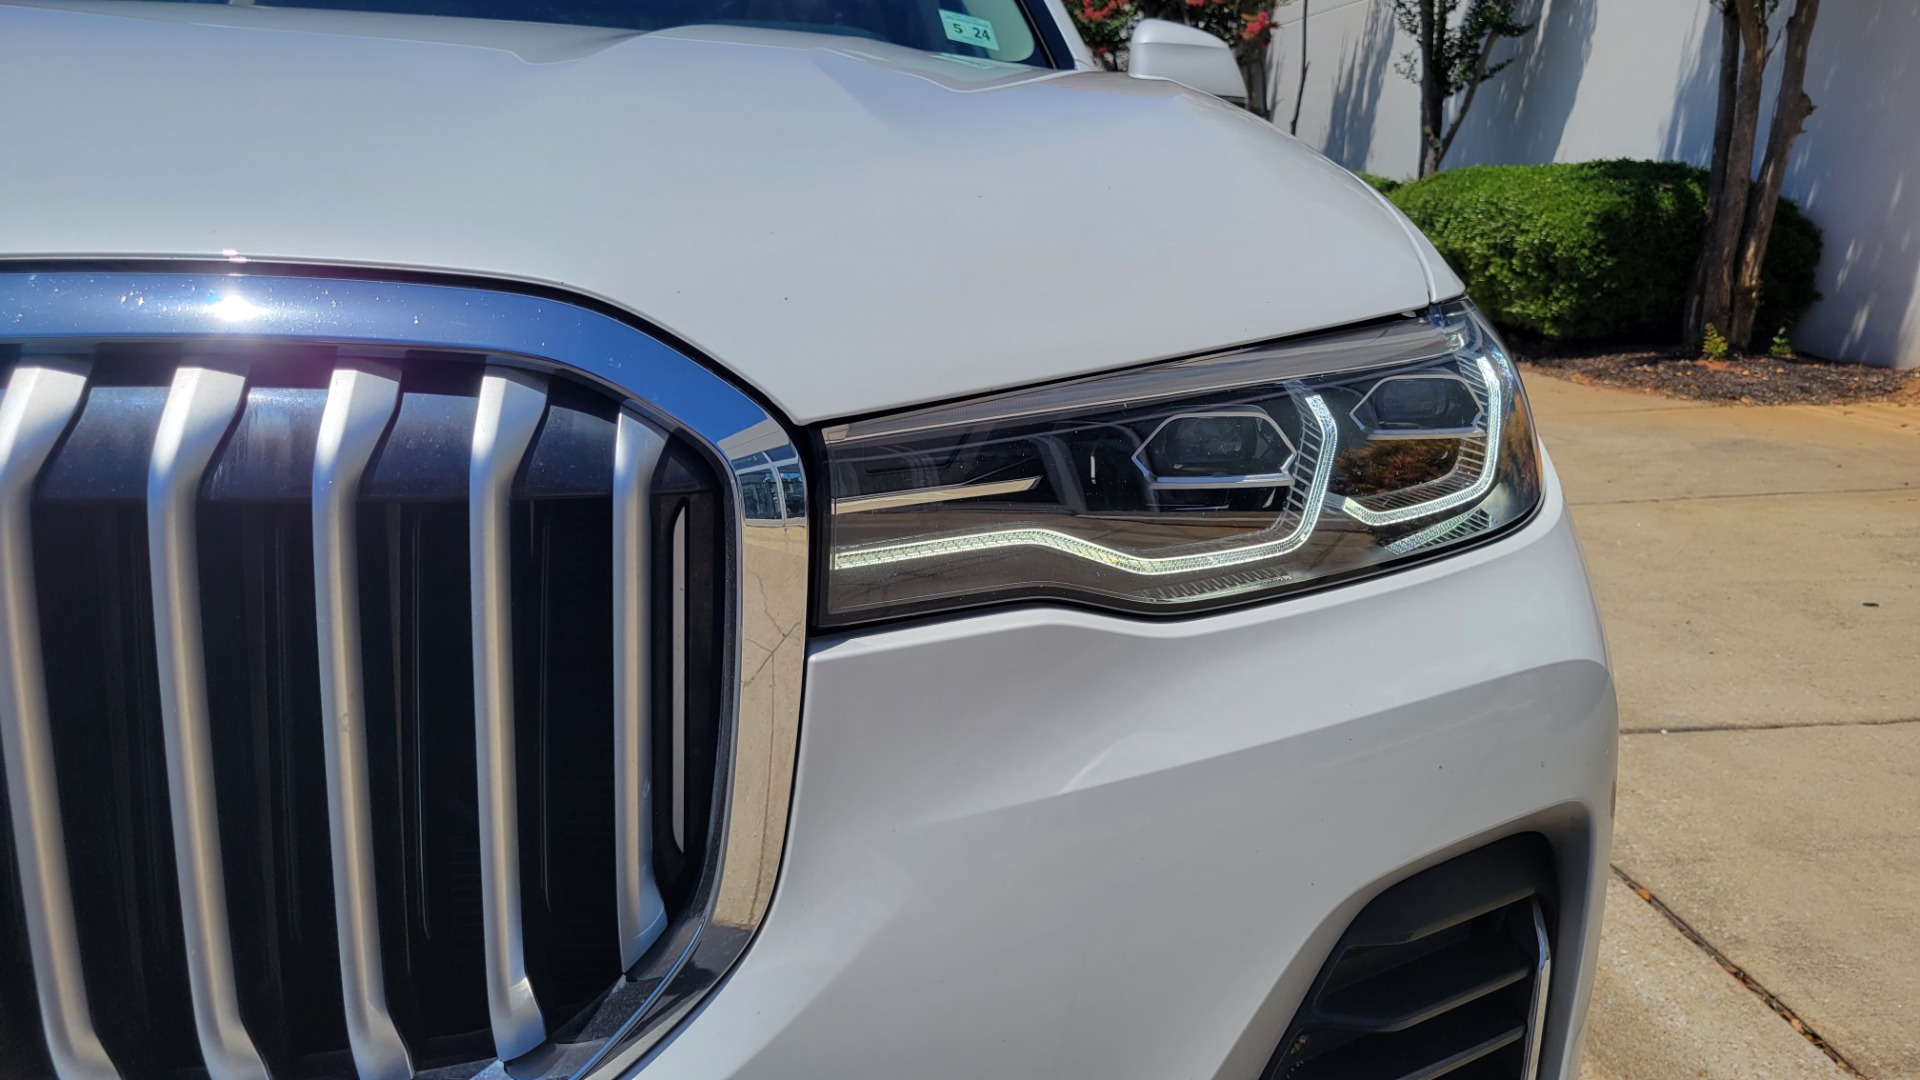 Used 2019 BMW X7 XDRIVE40I PREMIUM / NAV / HUD / PARK ASST PLUS / REMOTE START / 3D VIEW for sale $62,995 at Formula Imports in Charlotte NC 28227 35